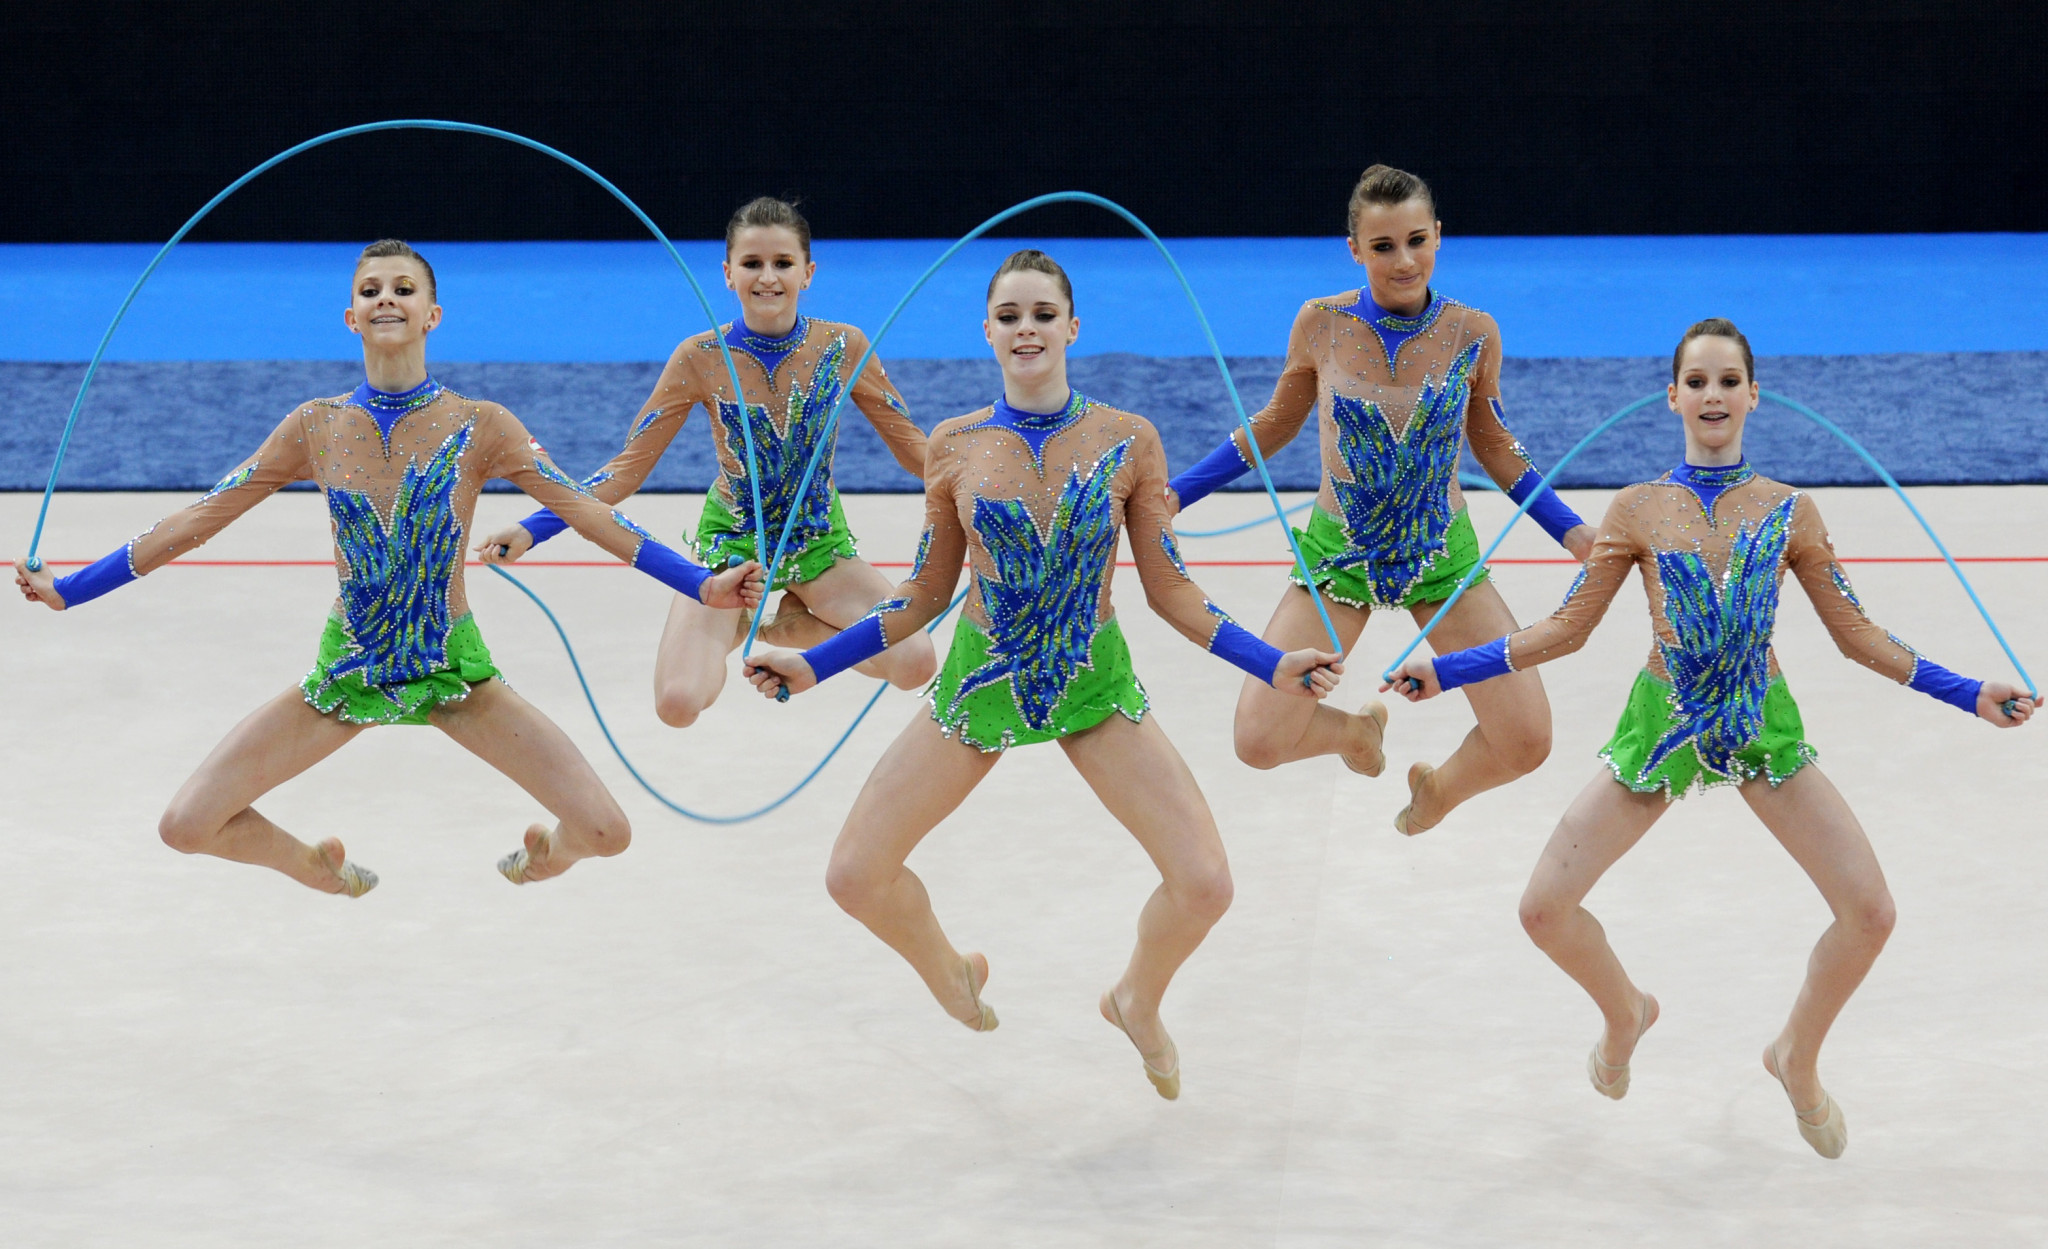 Rhythmic Gymnastics Technical Committee recommends measures to enhance sport